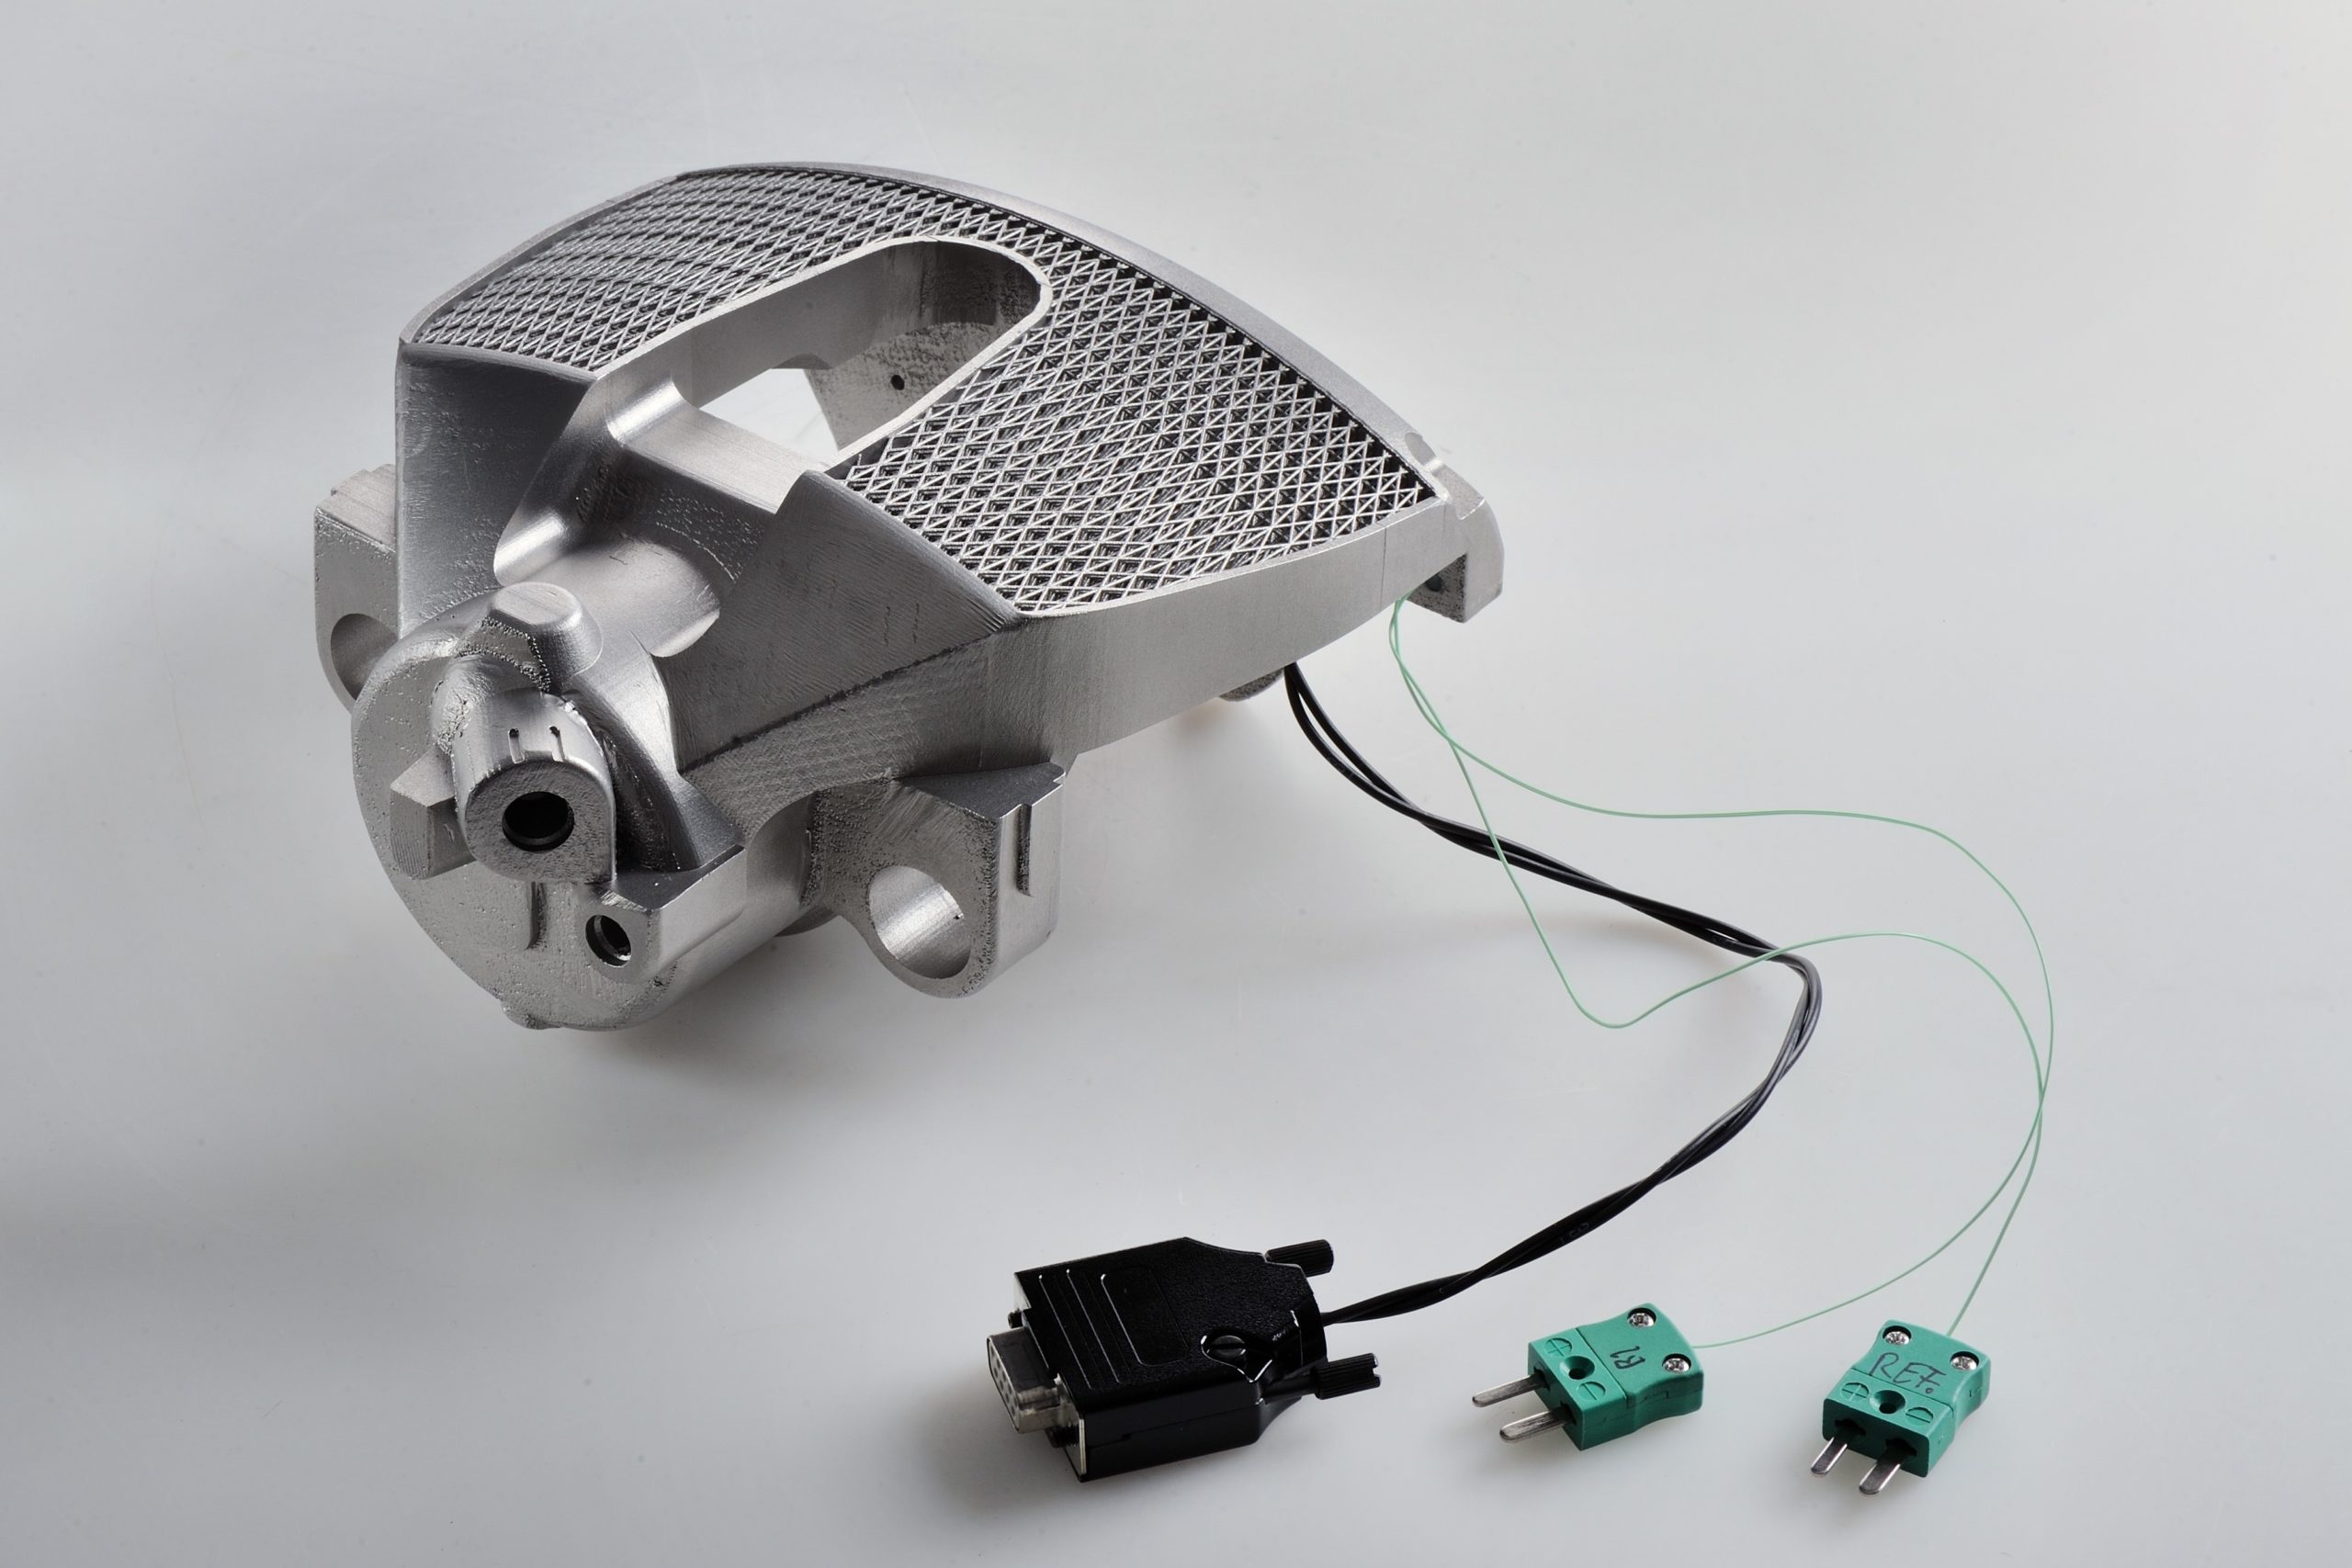 Example of a railroad brake caliper that Fraunhofer ILT will be testing for eventual use in railways across Europe.